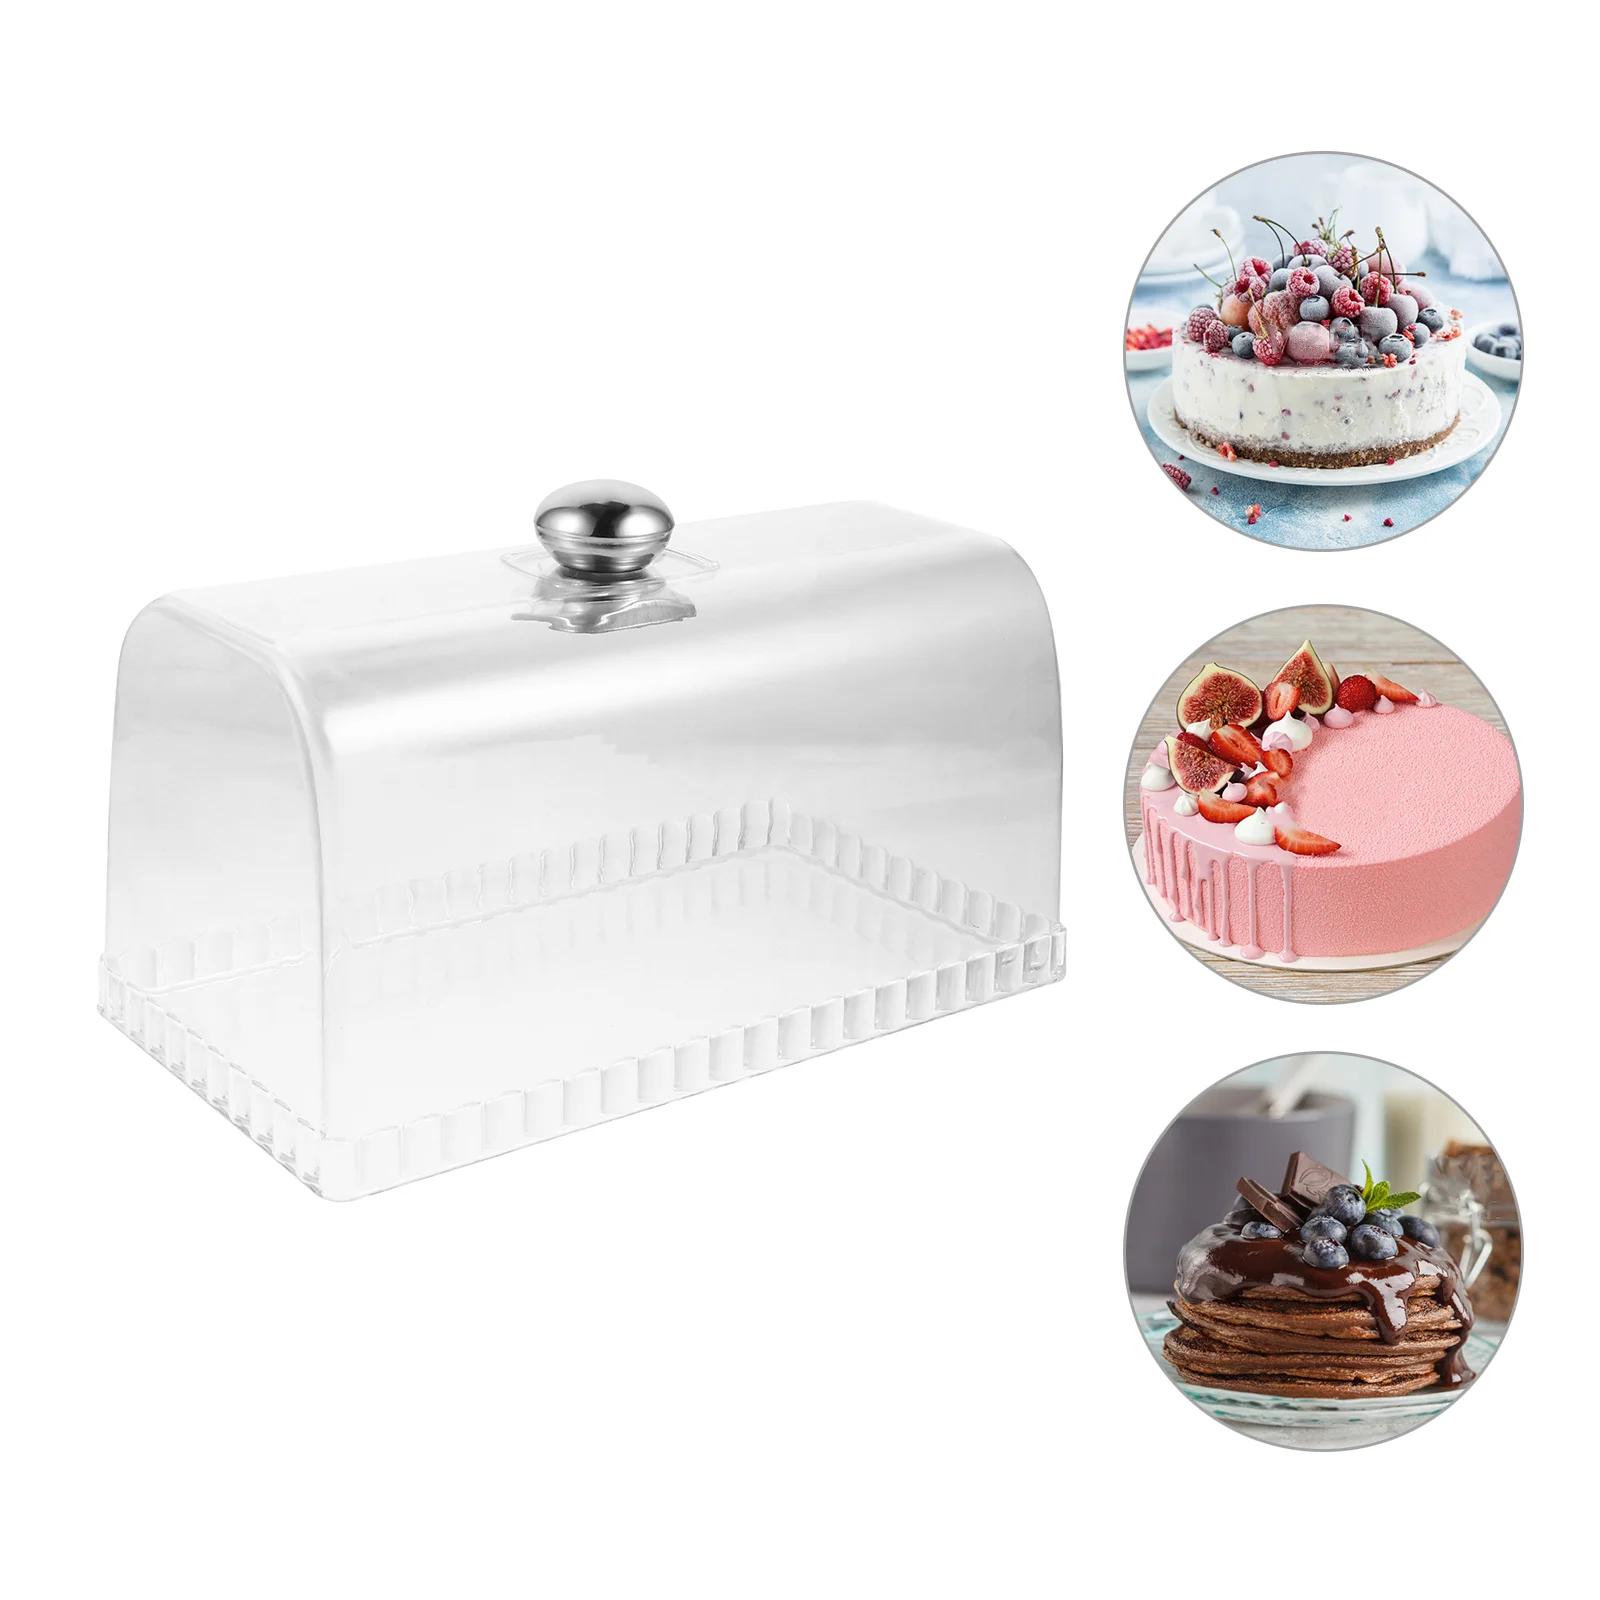 

Square Bread Pan Lid Food Platter Dome Glass Cake Stand Dessert Display Cover Butter Dish Tray Serving Acrylic